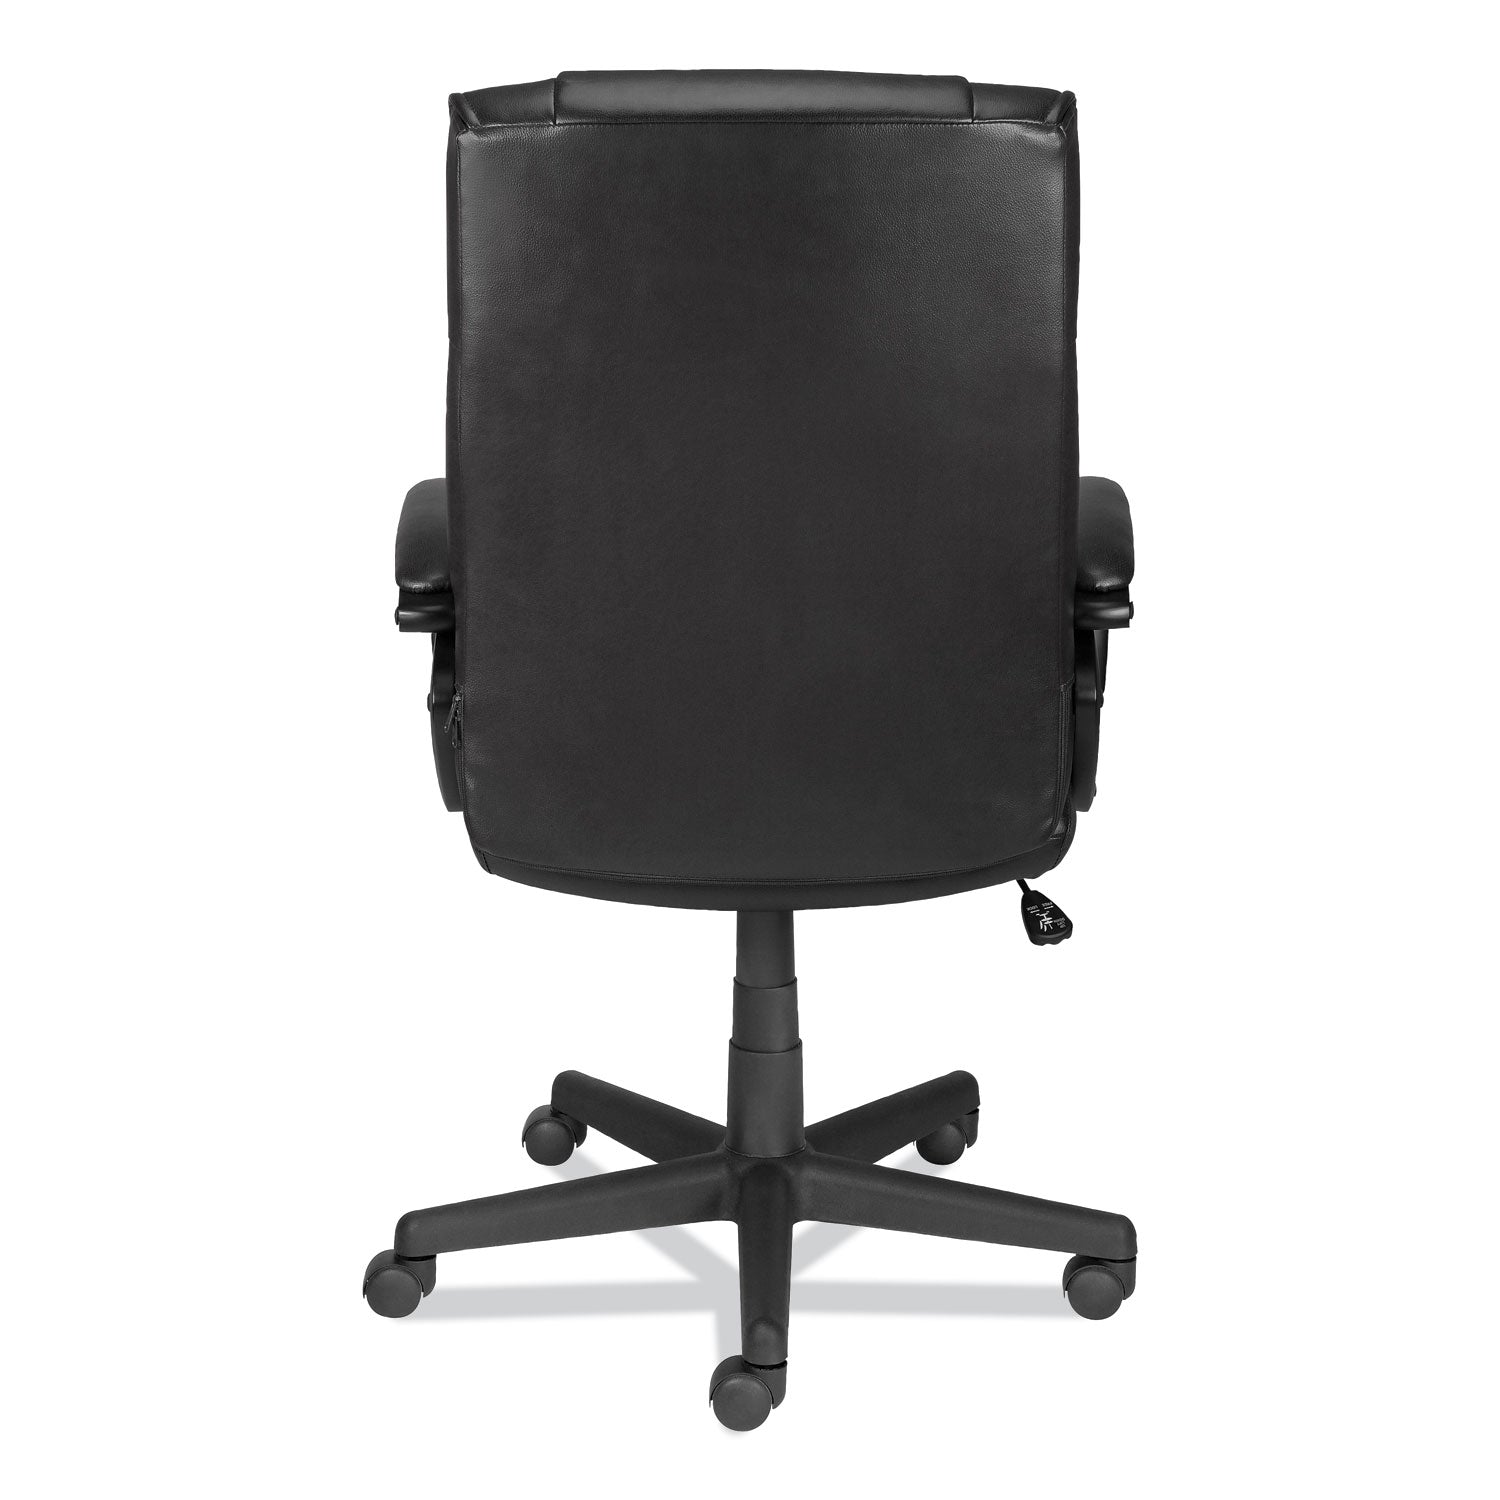 Alera Dalibor Series Manager Chair, Supports Up to 250 lb, 17.5" to 21.3" Seat Height, Black Seat/Back, Black Base - 3